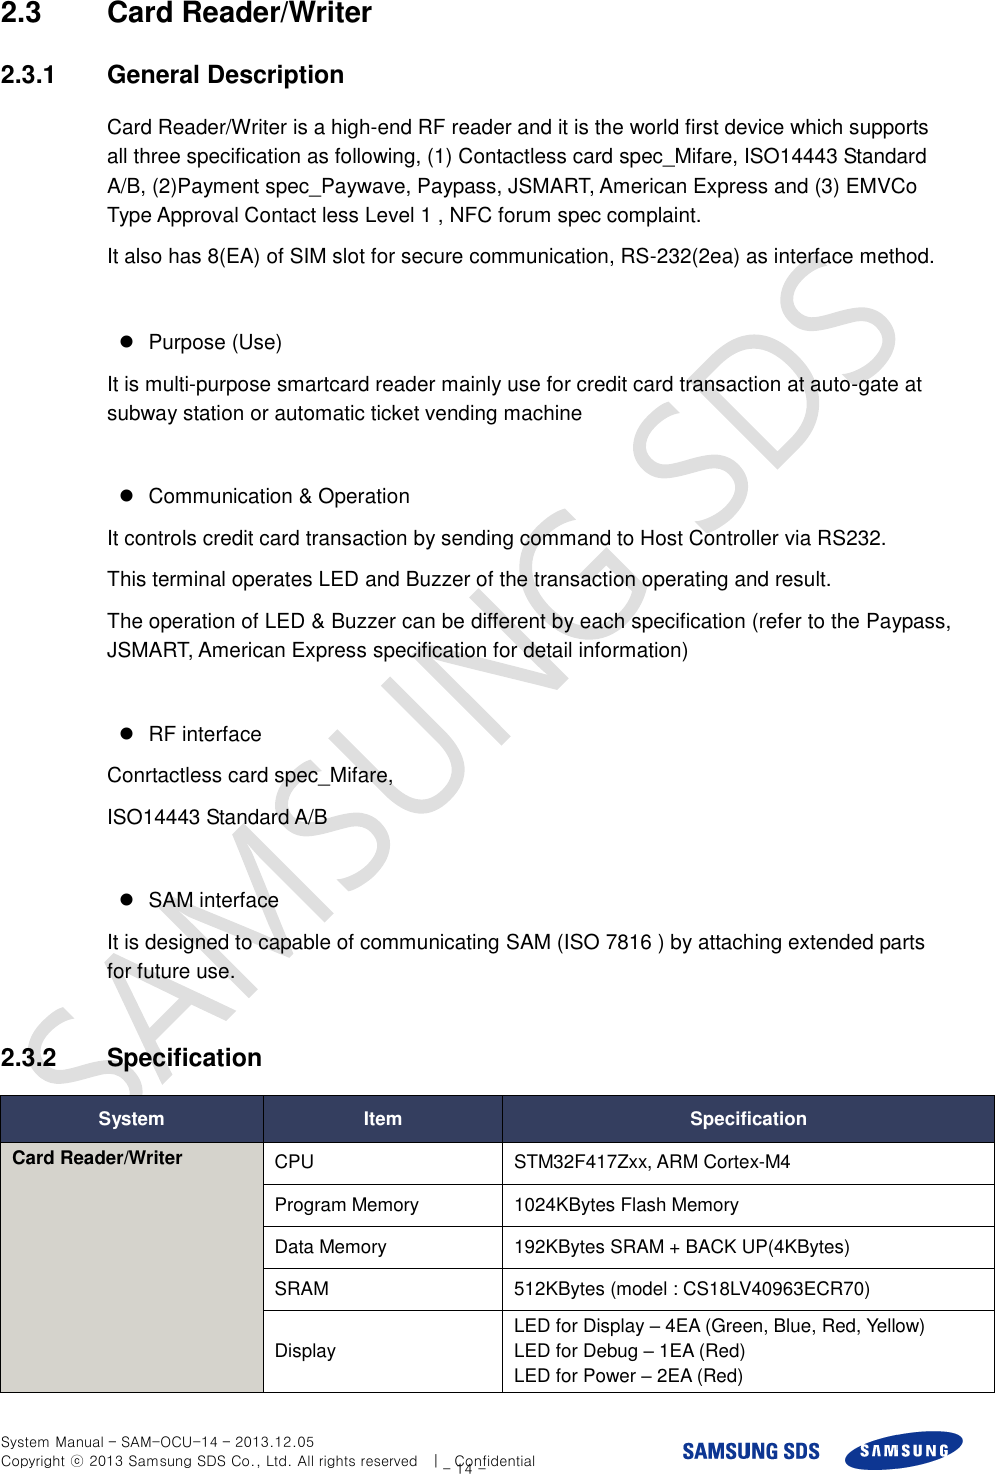  System Manual – SAM-OCU-14 – 2013.12.05 Copyright ⓒ 2013 Samsung SDS Co., Ltd. All rights reserved    |    Confidential - 14 - 2.3  Card Reader/Writer 2.3.1  General Description Card Reader/Writer is a high-end RF reader and it is the world first device which supports all three specification as following, (1) Contactless card spec_Mifare, ISO14443 Standard A/B, (2)Payment spec_Paywave, Paypass, JSMART, American Express and (3) EMVCo Type Approval Contact less Level 1 , NFC forum spec complaint.   It also has 8(EA) of SIM slot for secure communication, RS-232(2ea) as interface method.    Purpose (Use) It is multi-purpose smartcard reader mainly use for credit card transaction at auto-gate at subway station or automatic ticket vending machine    Communication &amp; Operation It controls credit card transaction by sending command to Host Controller via RS232. This terminal operates LED and Buzzer of the transaction operating and result. The operation of LED &amp; Buzzer can be different by each specification (refer to the Paypass, JSMART, American Express specification for detail information)      RF interface Conrtactless card spec_Mifare,   ISO14443 Standard A/B    SAM interface It is designed to capable of communicating SAM (ISO 7816 ) by attaching extended parts for future use.    2.3.2  Specification System Item Specification Card Reader/Writer CPU STM32F417Zxx, ARM Cortex-M4 Program Memory 1024KBytes Flash Memory   Data Memory 192KBytes SRAM + BACK UP(4KBytes) SRAM 512KBytes (model : CS18LV40963ECR70) Display LED for Display – 4EA (Green, Blue, Red, Yellow) LED for Debug – 1EA (Red) LED for Power – 2EA (Red) 